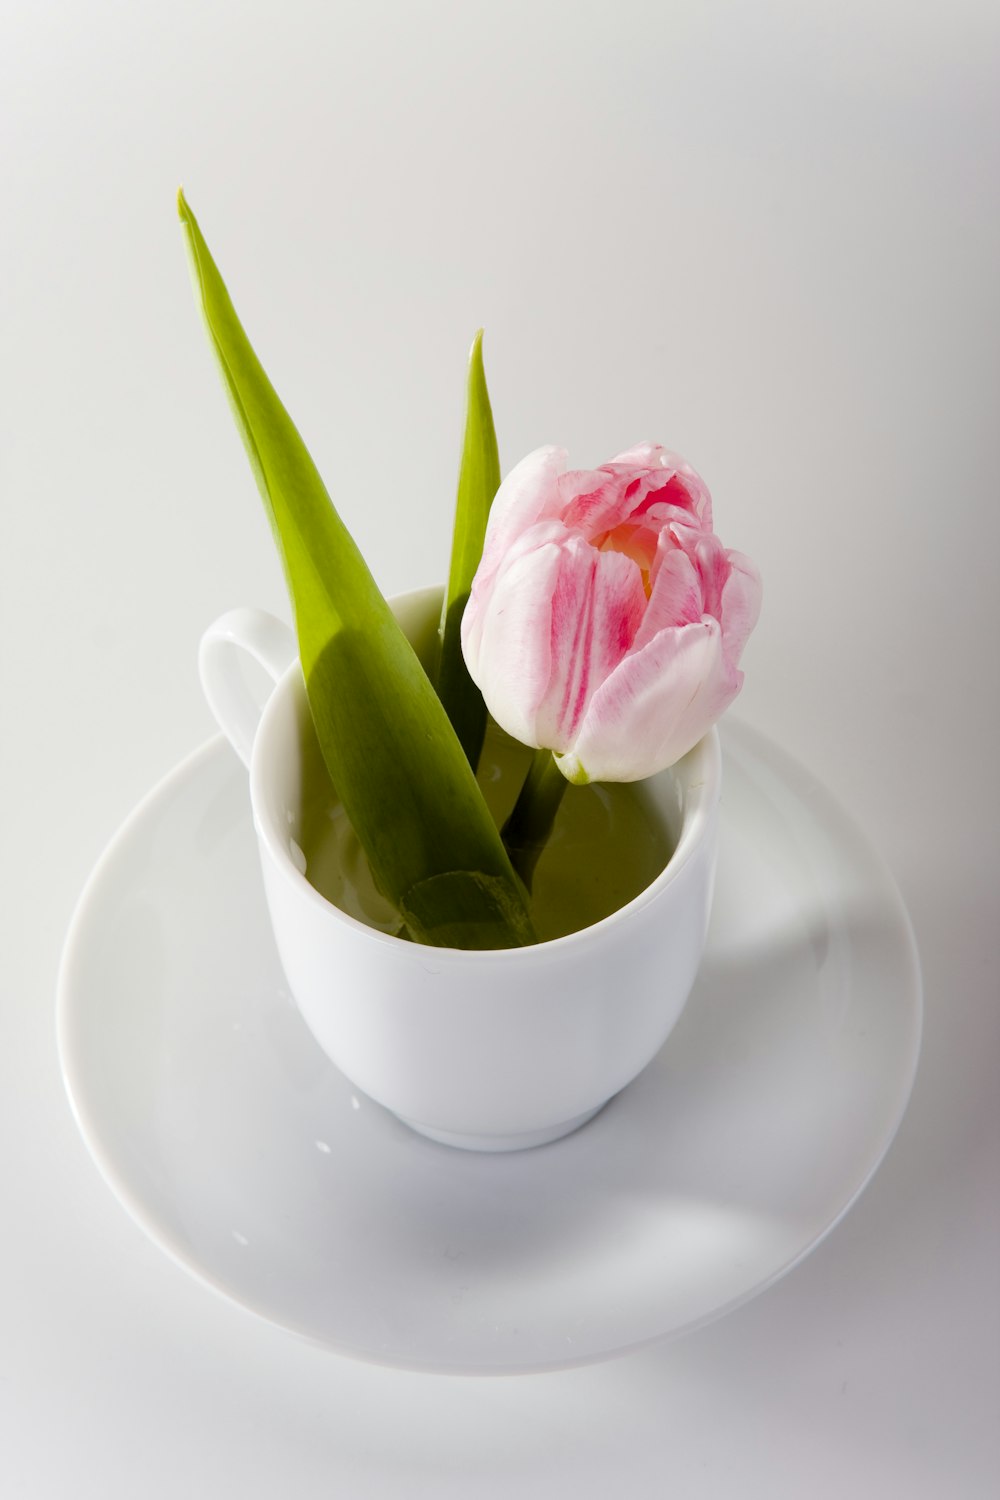 pink and white flower on white ceramic teacup